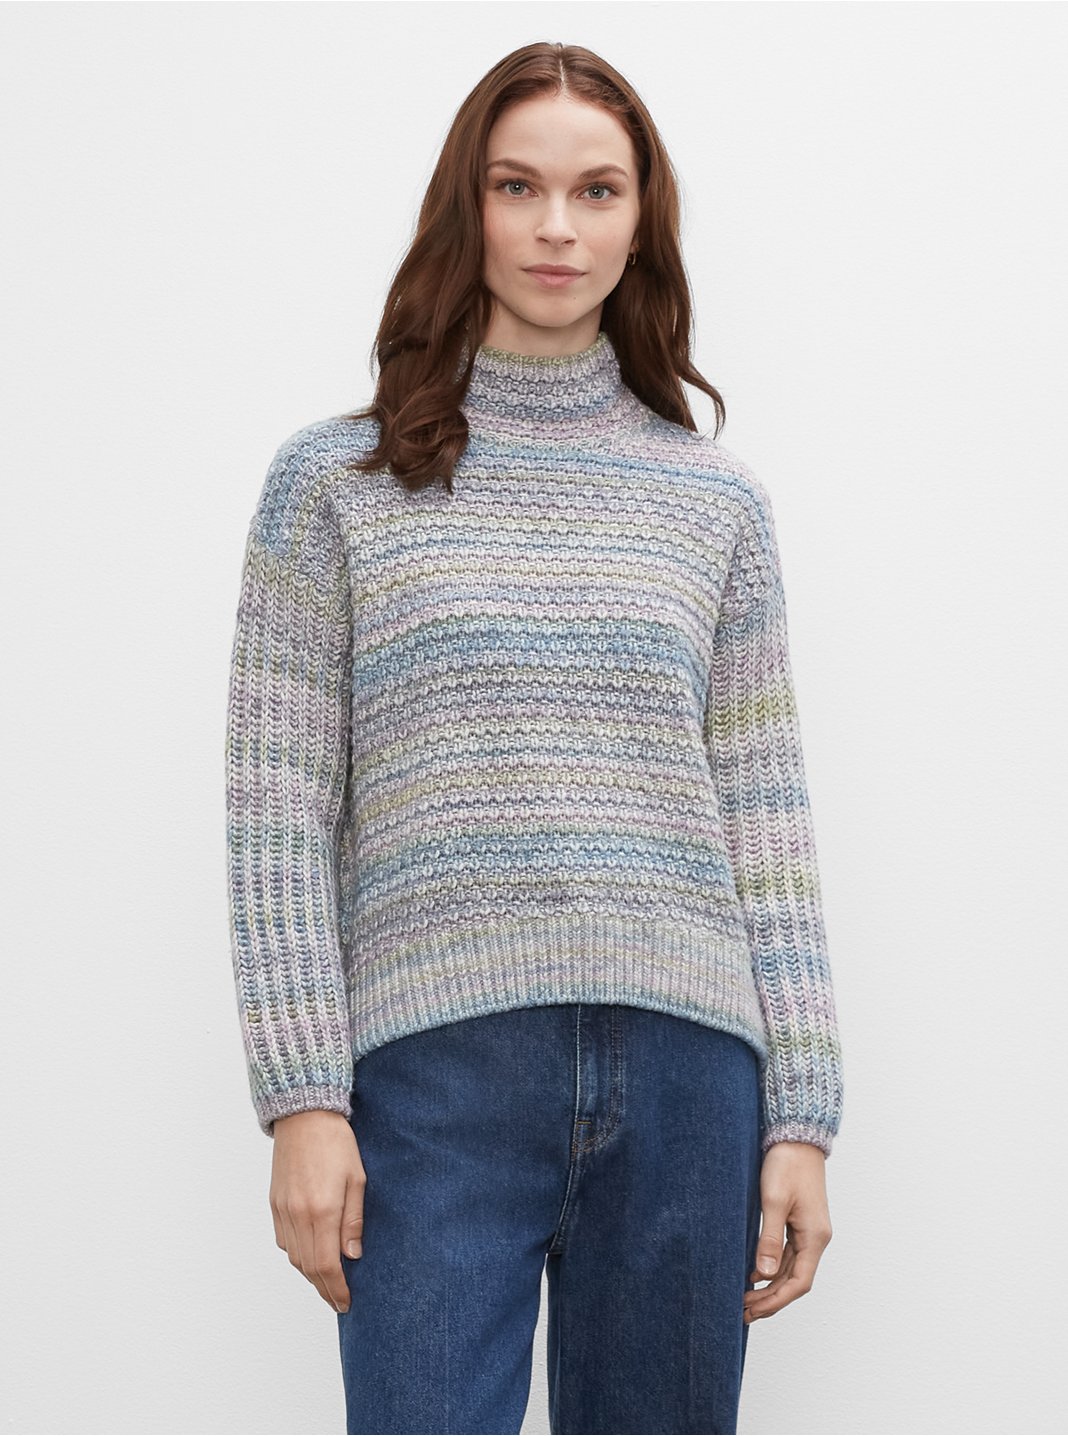 Clubmonaco Space Dyed Texture Mockneck Sweater